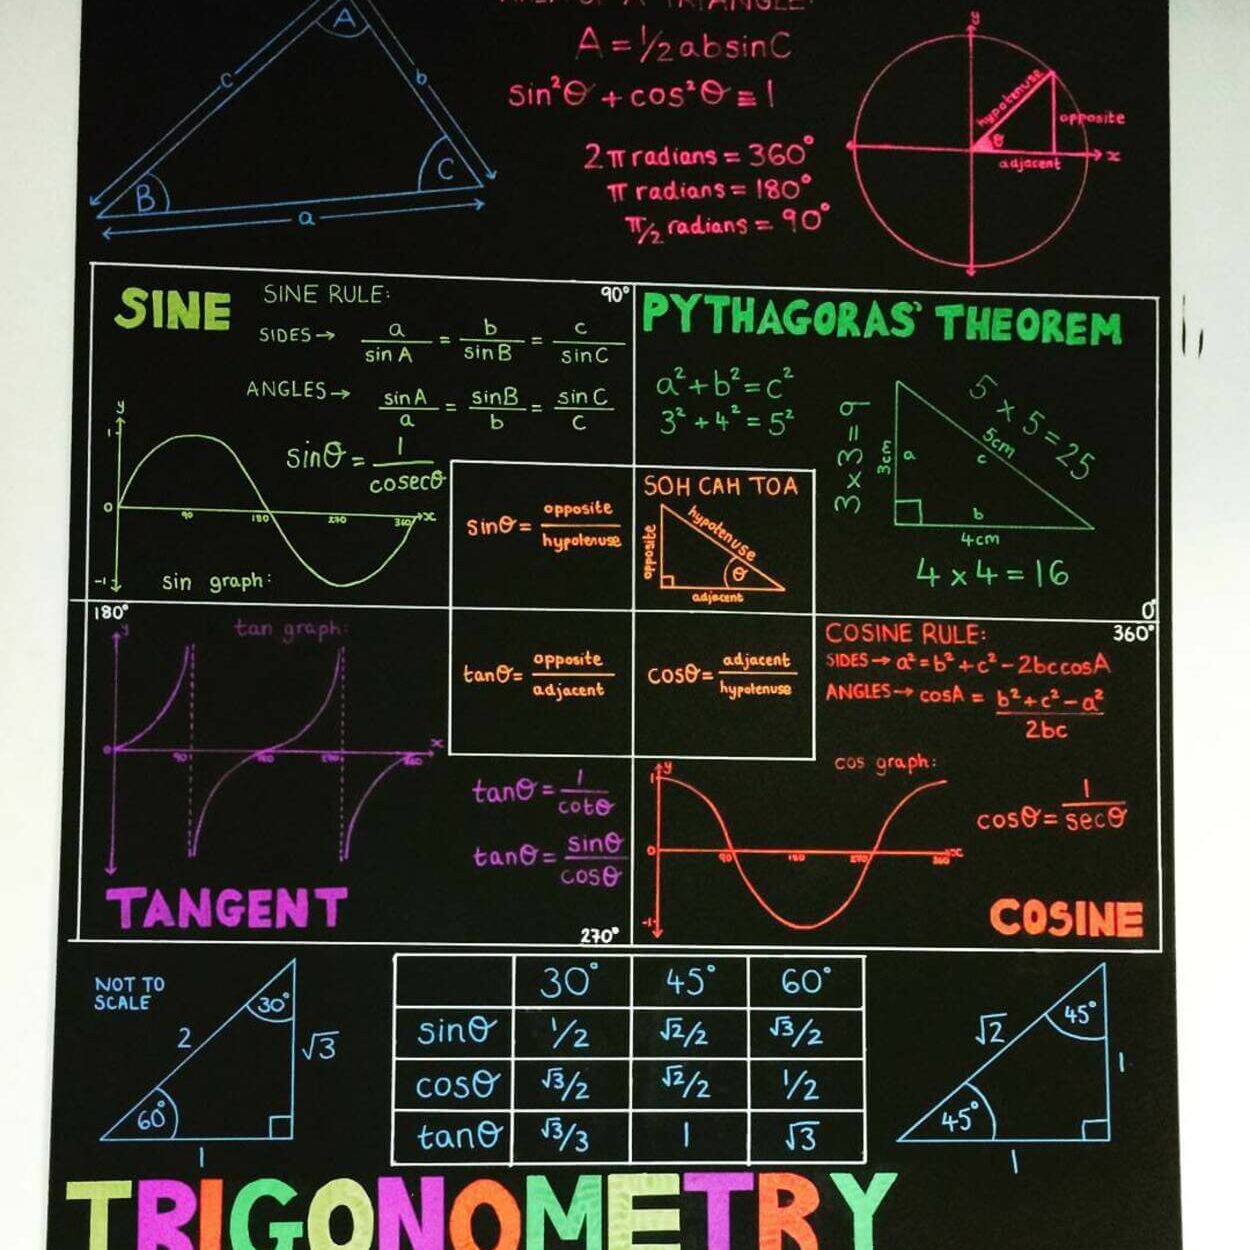 Image of a black board showing trignometric equations.